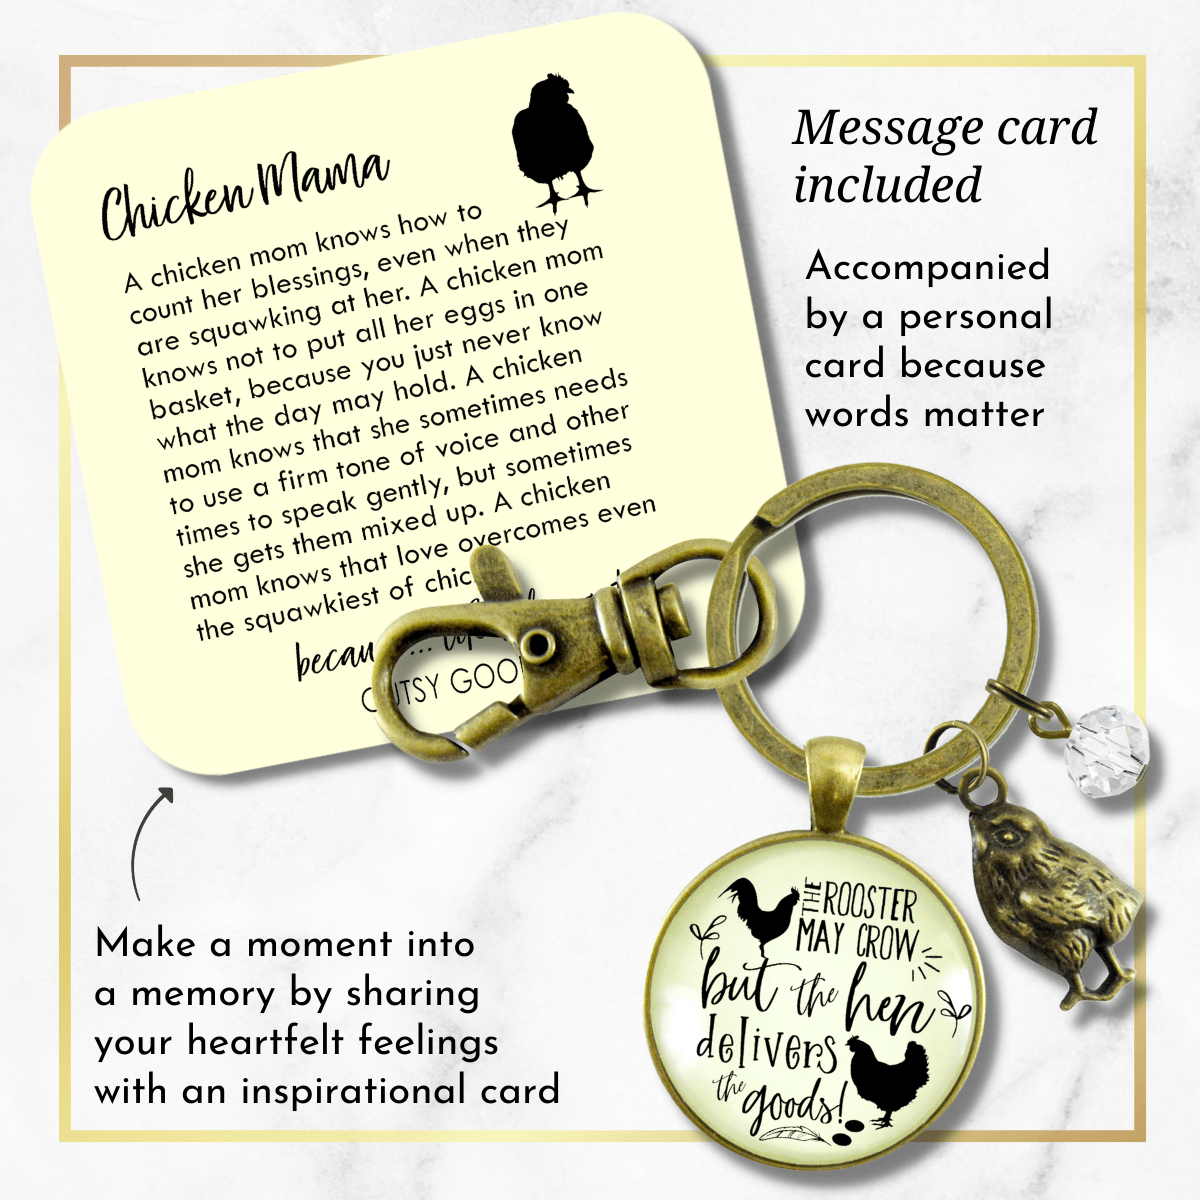 Chicken Keychain Rooster May Crow Hen Delivers Jewelry - Gutsy Goodness Handmade Jewelry;Chicken Keychain Rooster May Crow Hen Delivers Jewelry - Gutsy Goodness Handmade Jewelry Gifts